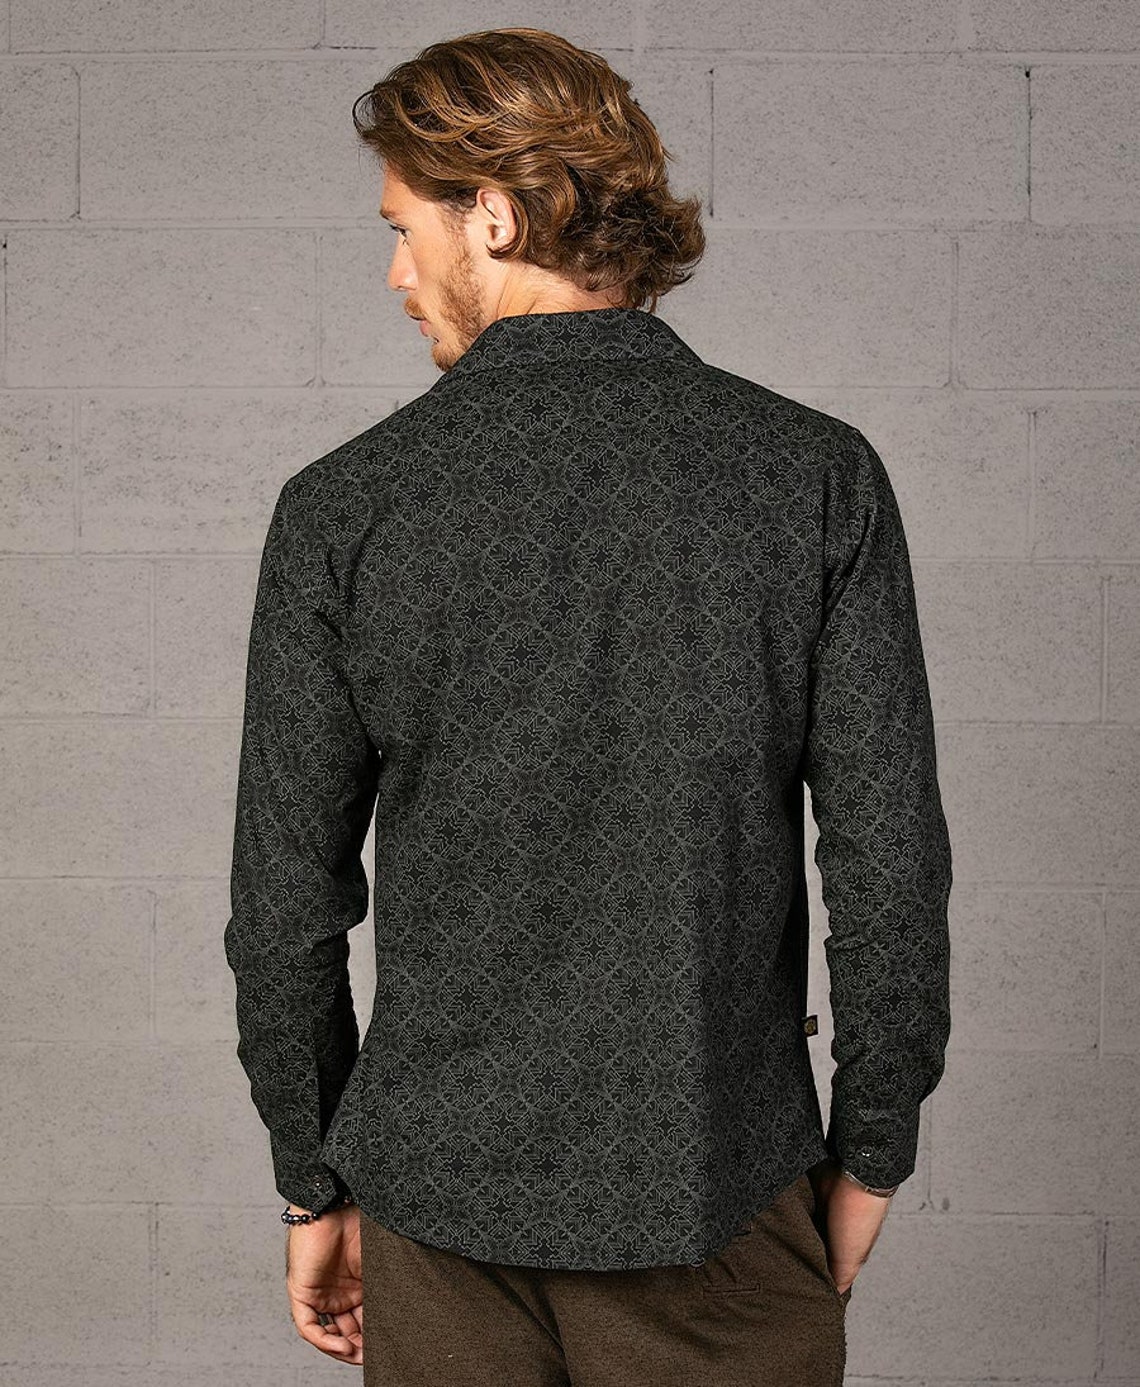 Urban Streetwear Button Up Shirts for Men Rave Clothing | Etsy